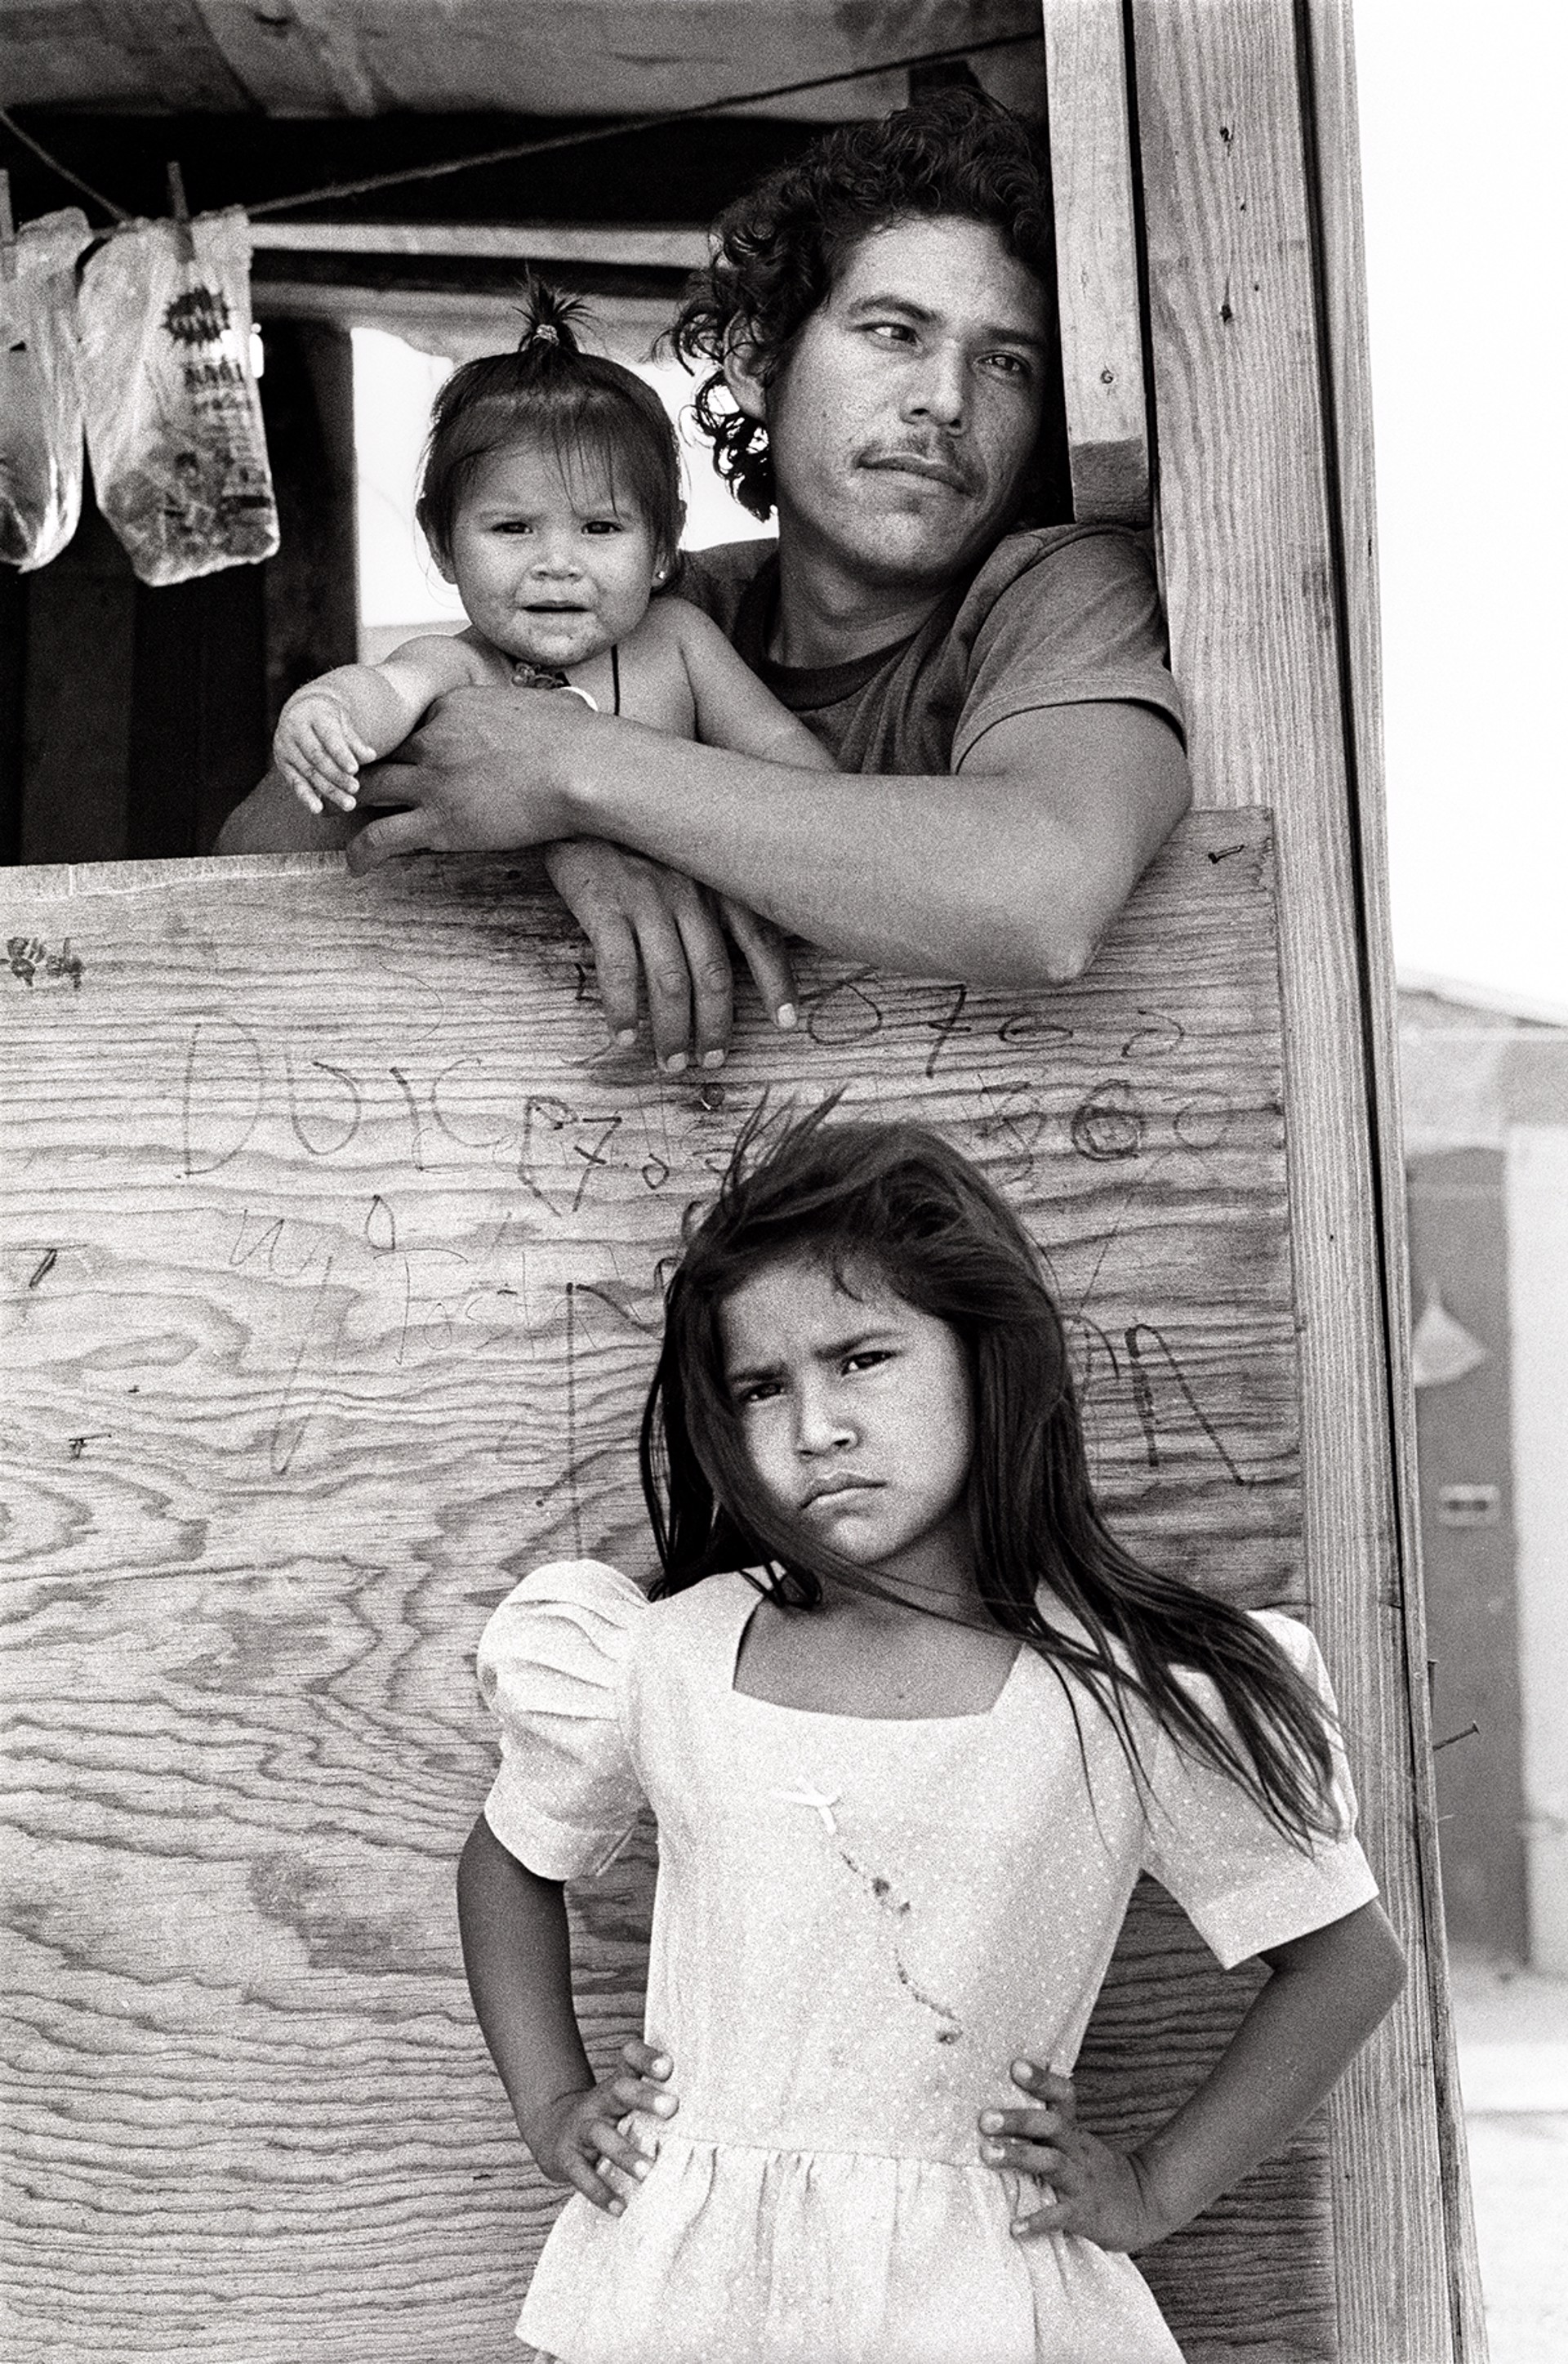 Child with Father and Sister, Colonia, Nuevo Laredo\Mexico, April 19, 1993   1/10 by Laura Wilson